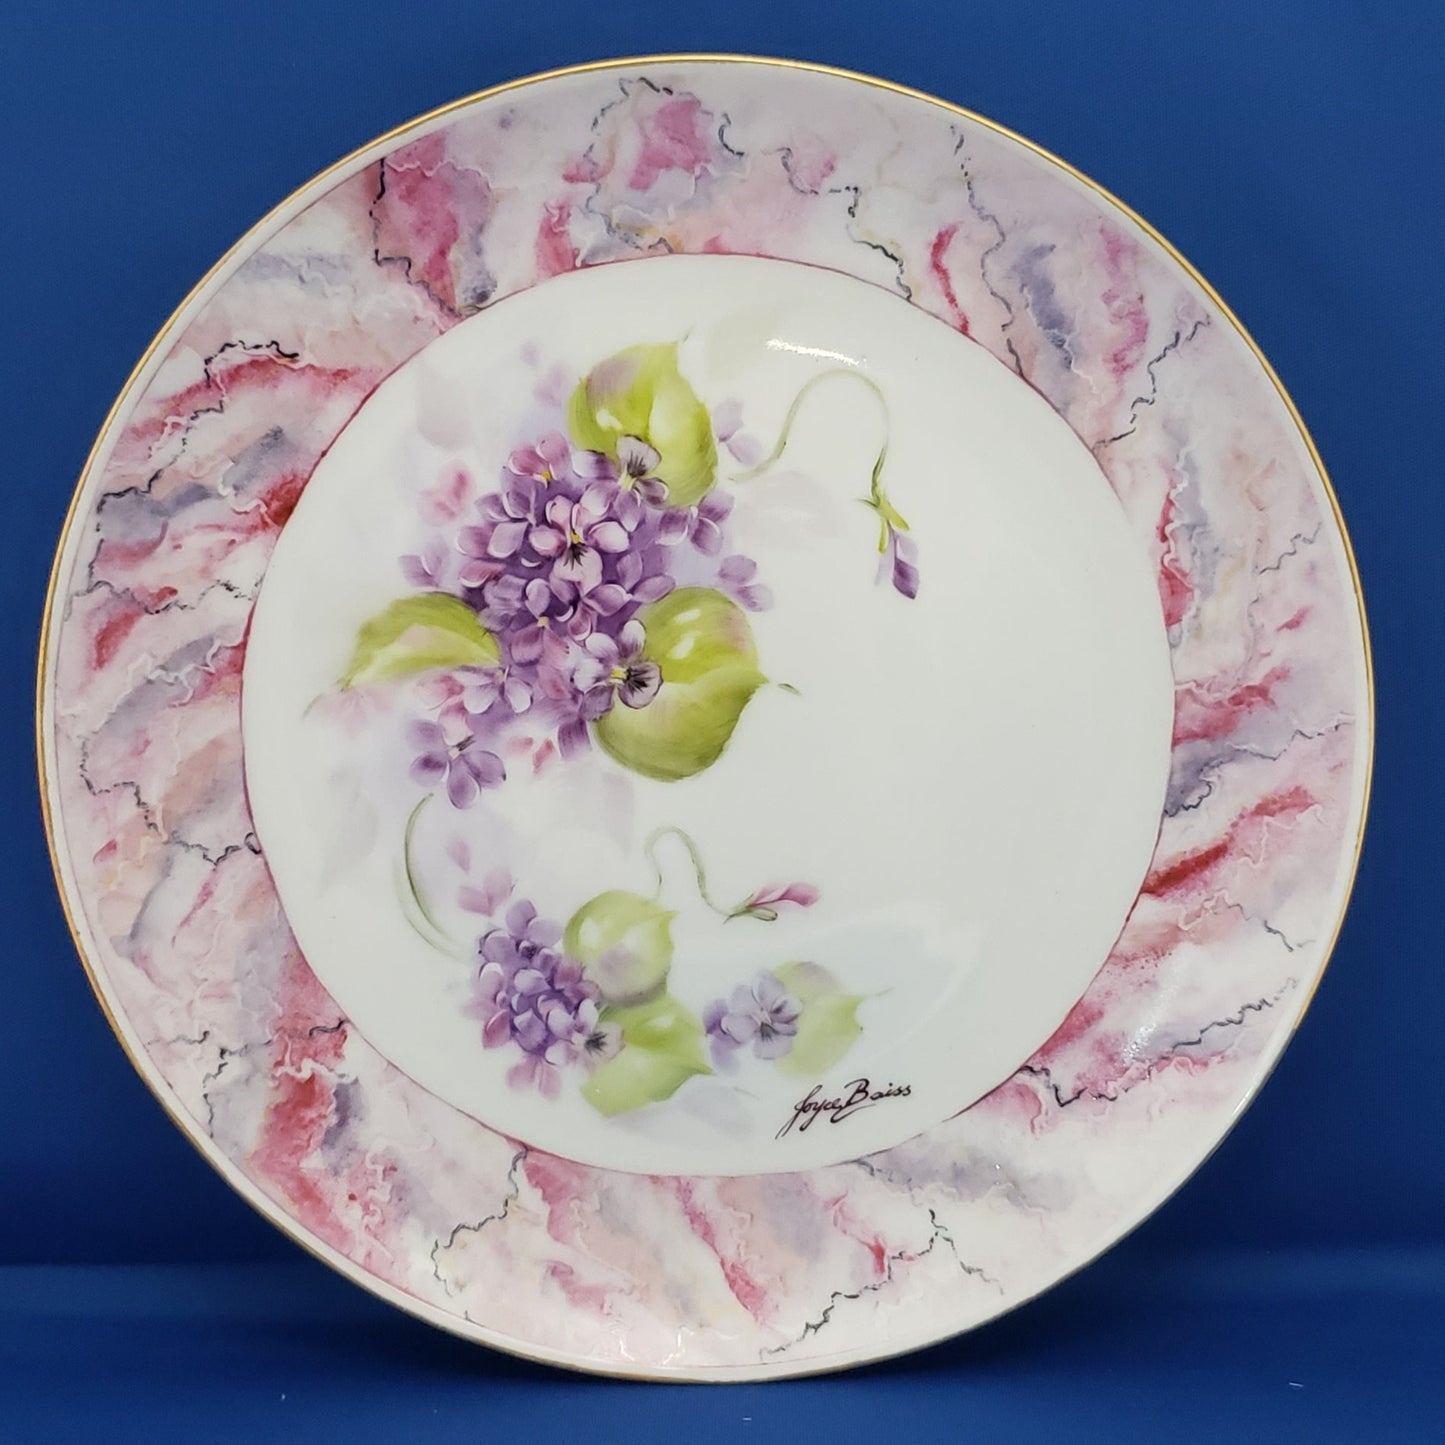 Plate with Violet  Flowers 10 in. round